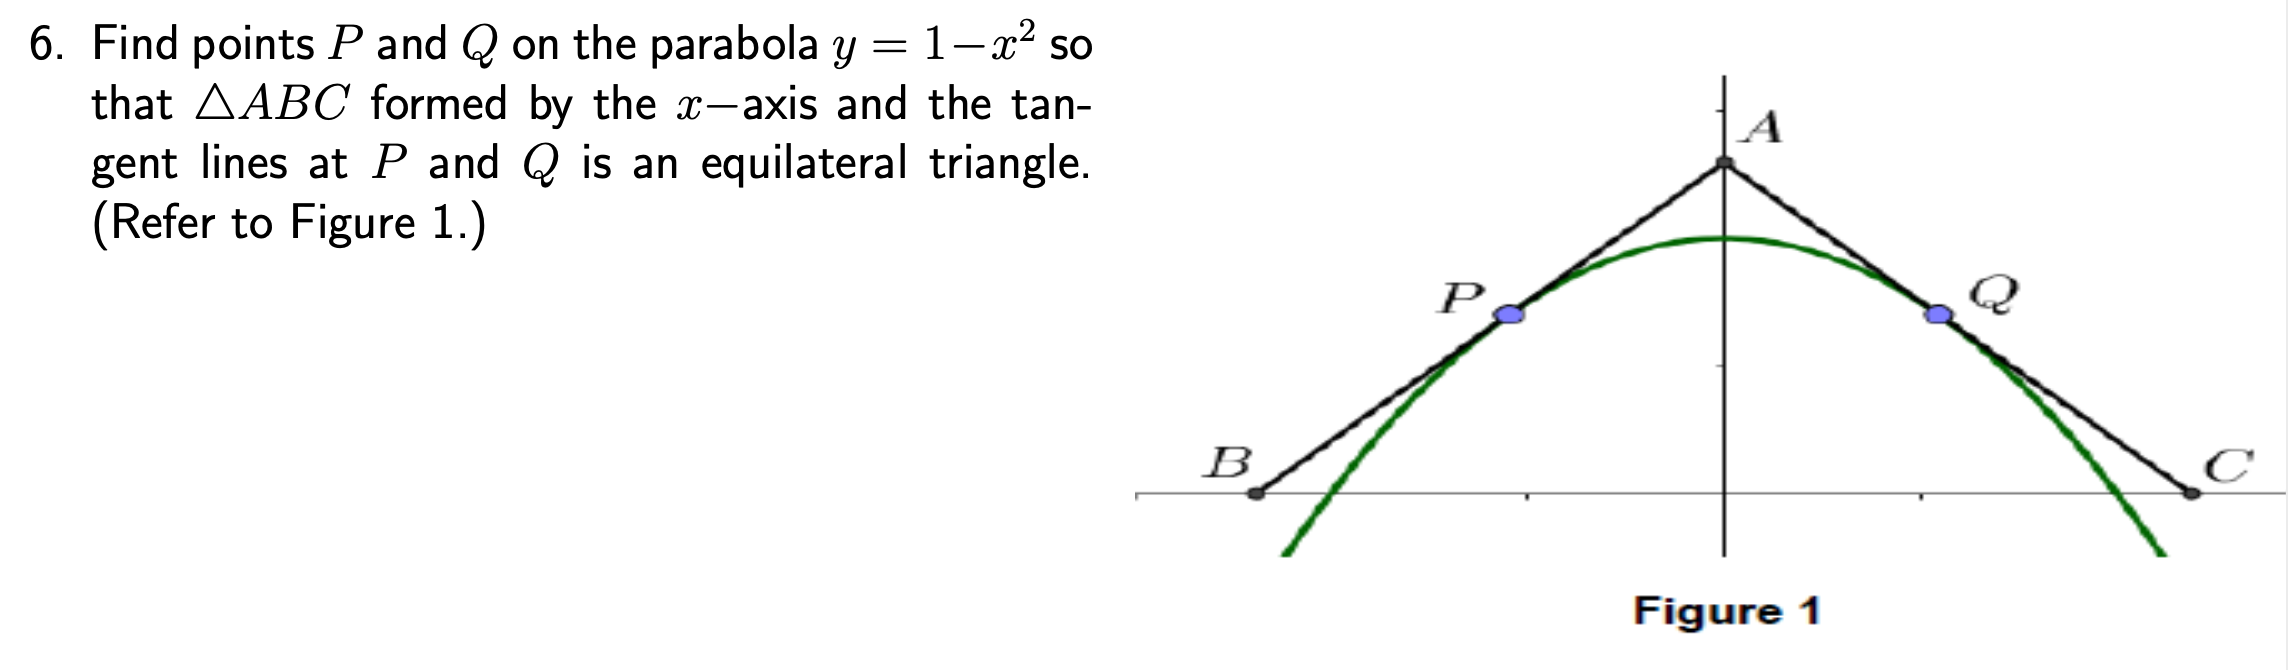 6. Find points P and Q on the parabola y = 1-x² so
that AABC formed by the x-axis and the tan-
gent lines at P and Q is an equilateral triangle.
(Refer to Figure 1.)
P
Figure 1
